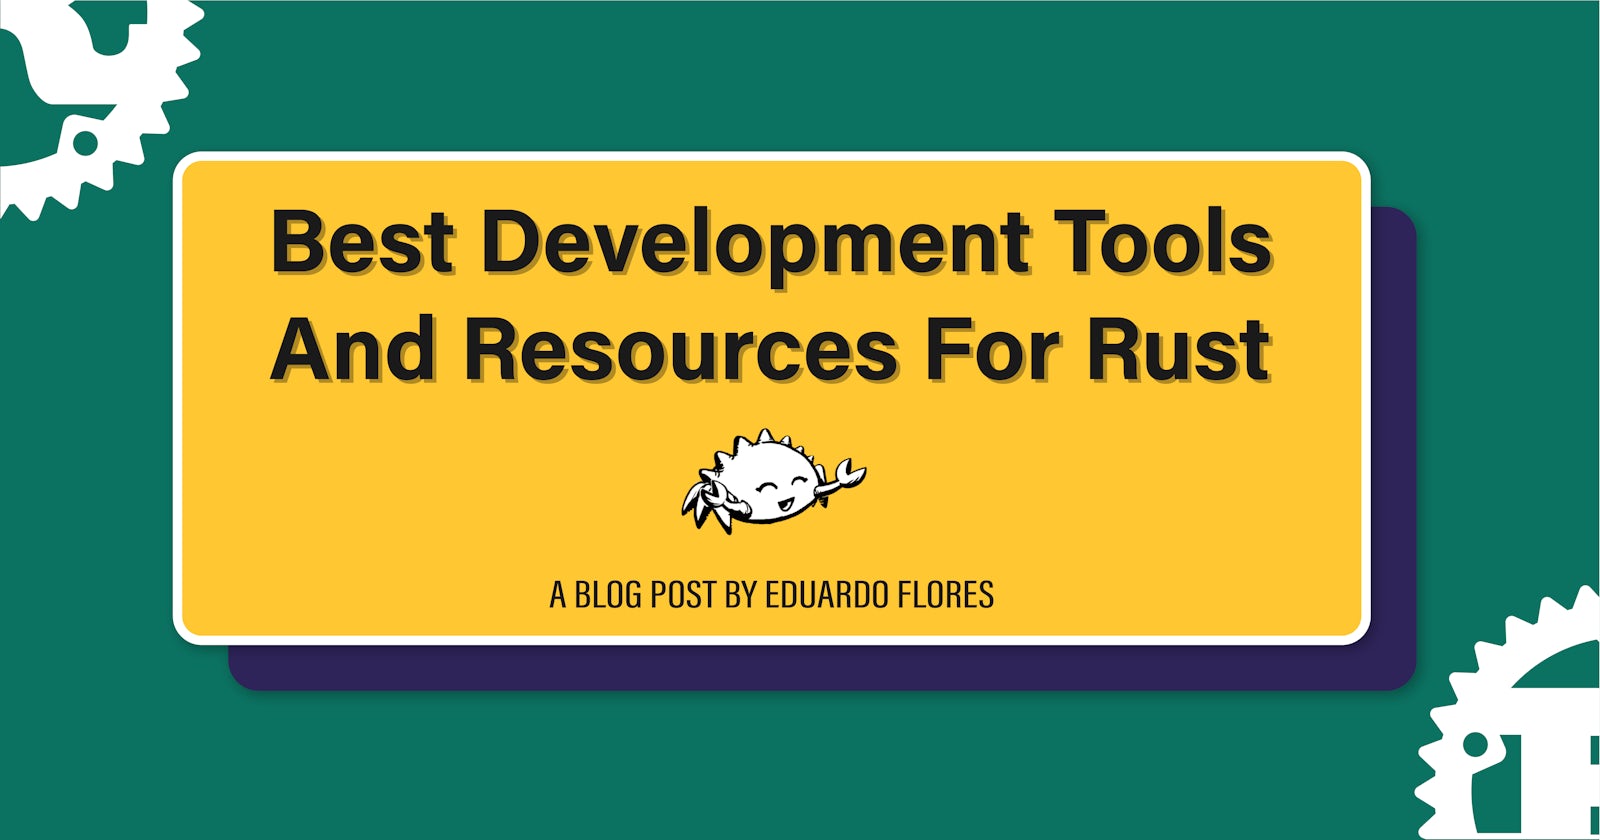 Best Development Tools And Resources For Rust